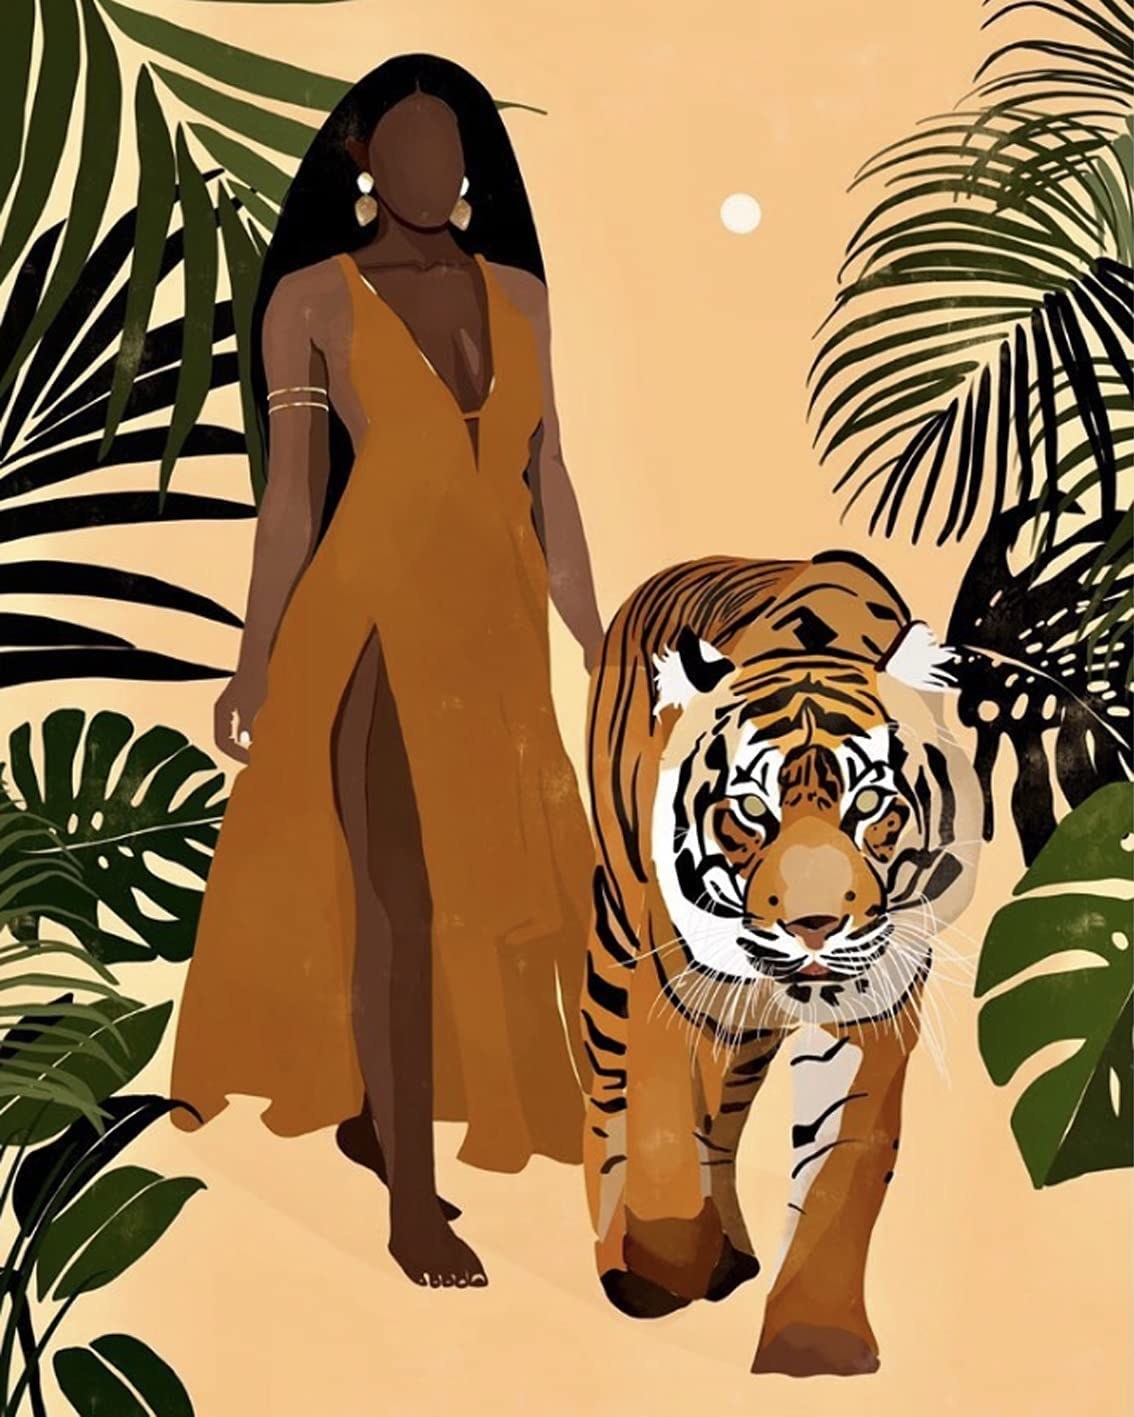 painting of woman walking beside a tiger with botanical details